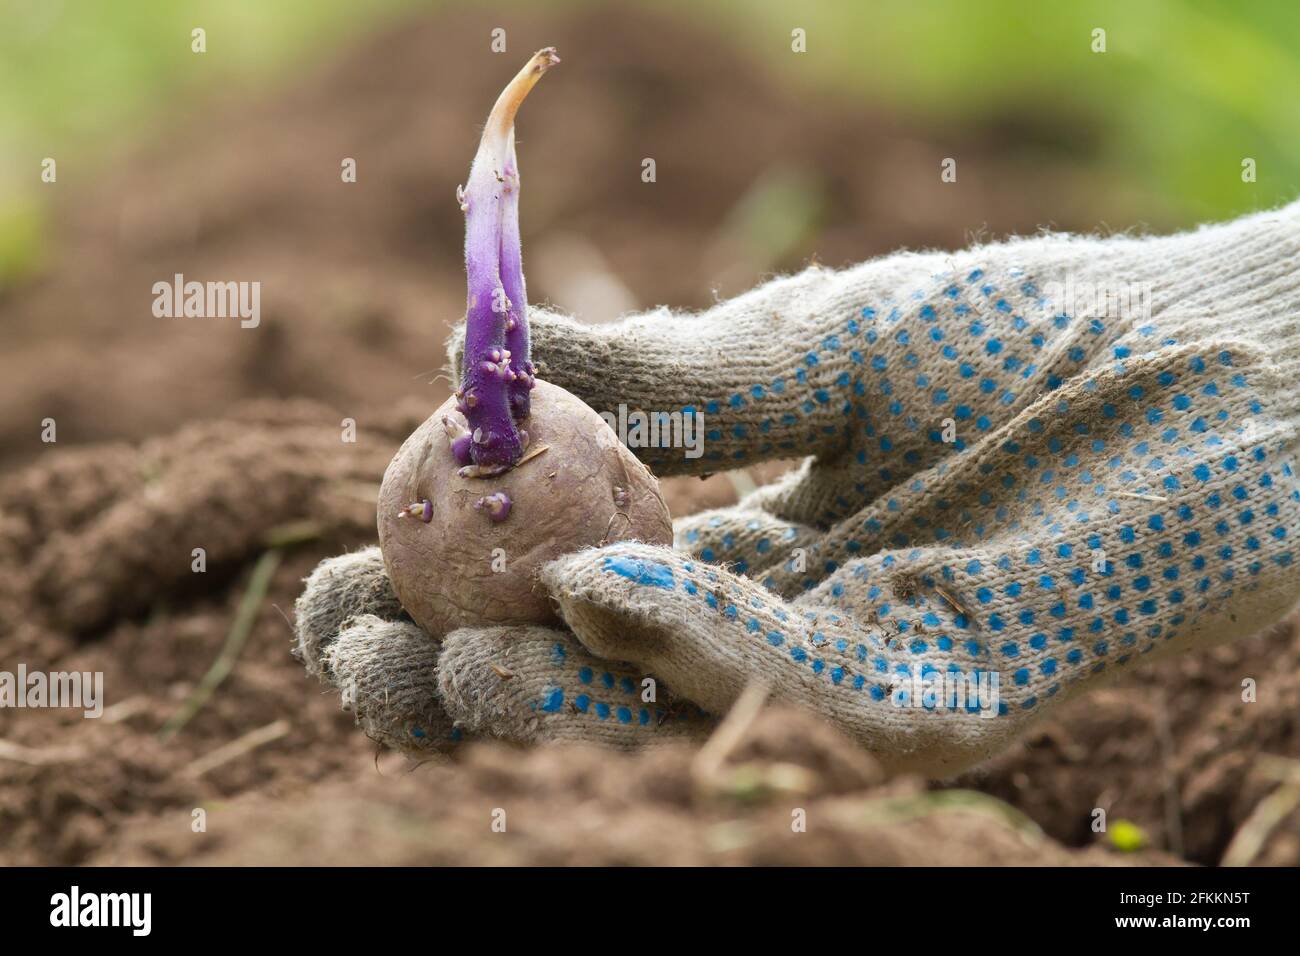 the hand of the gardener in glove is holding a potato tuber with a sprout above the bed Stock Photo